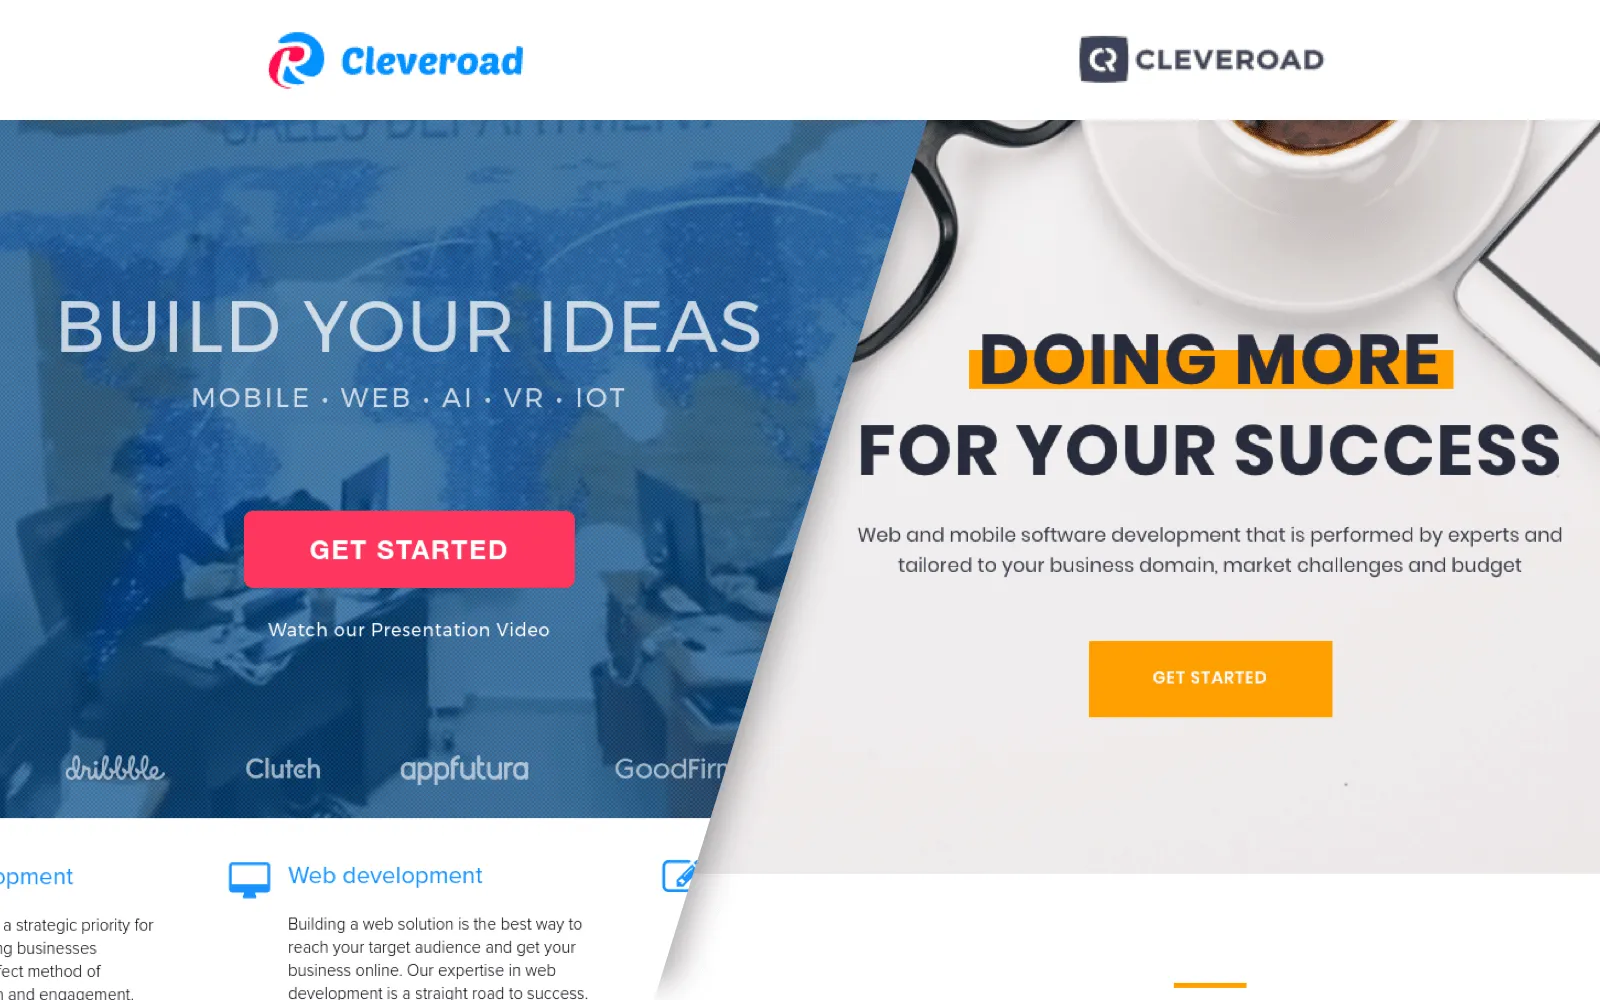 Compare old Cleveroad's website with the redesigned one